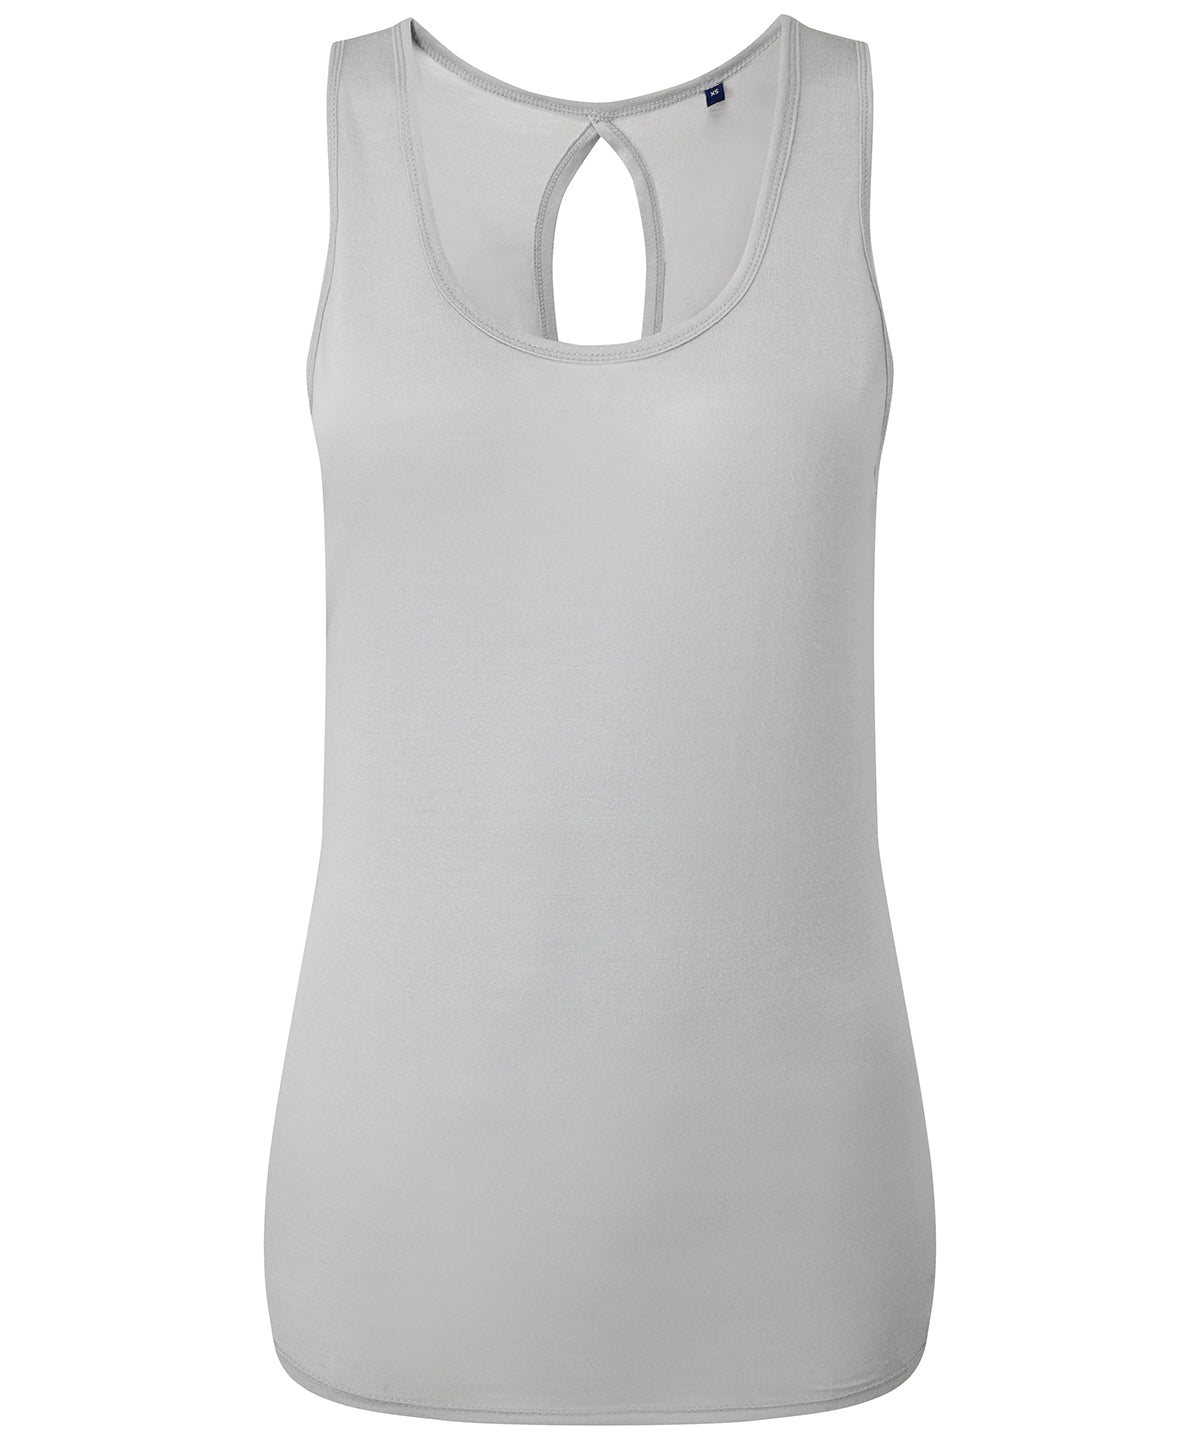 Cool Grey - Women's TriDri® tie-back vest Vests TriDri® Activewear & Performance, Exclusives, On-Trend Activewear, Padded Perfection, Plus Sizes, Rebrandable, Sports & Leisure, T-Shirts & Vests Schoolwear Centres